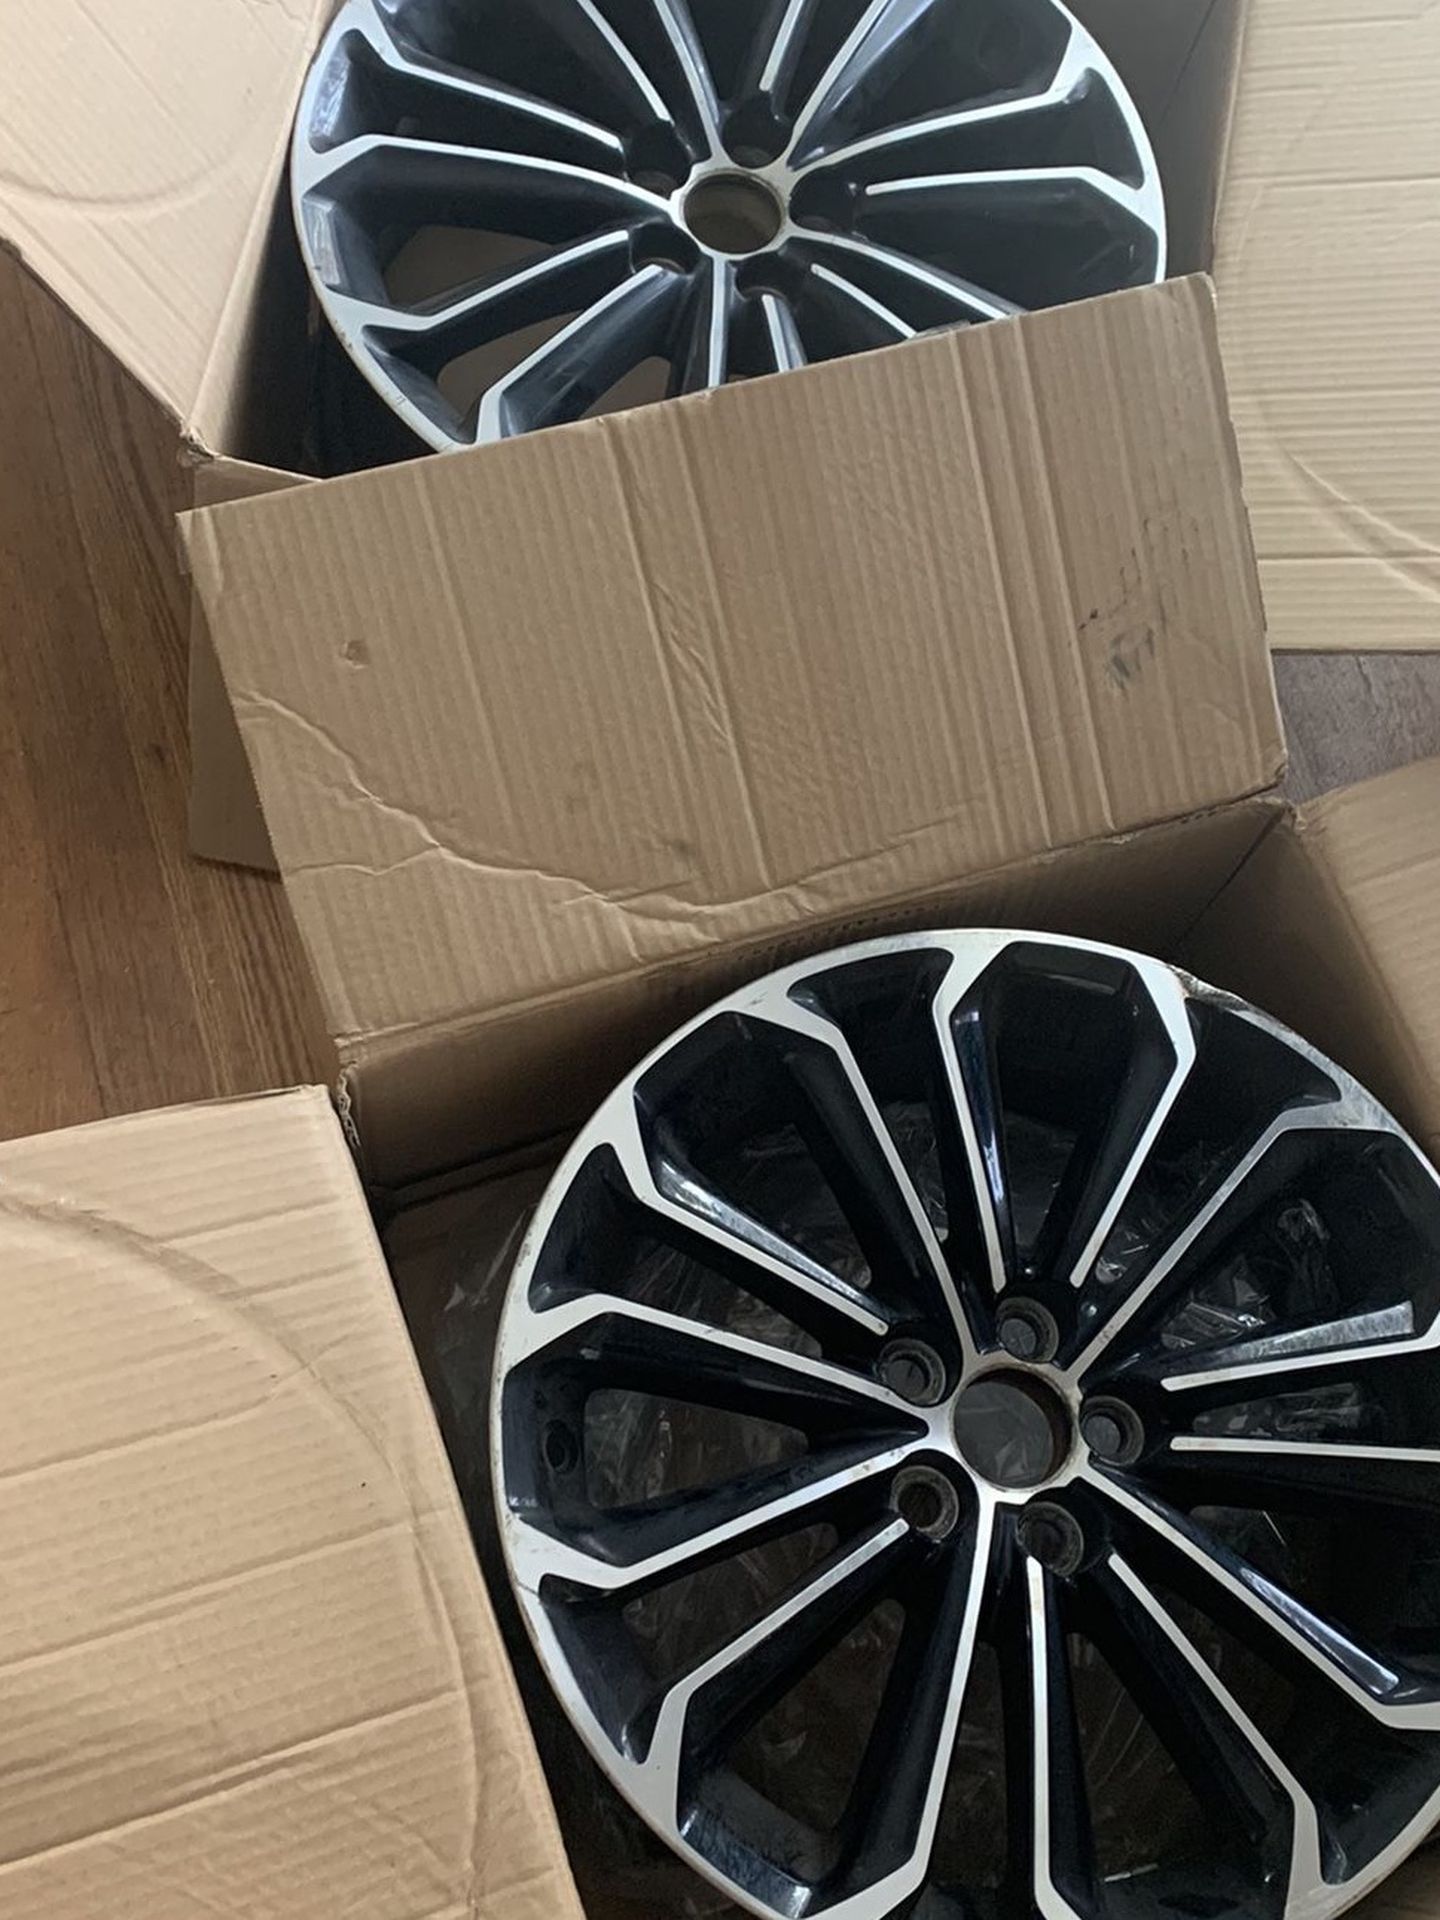 TWO TOYOTA RIMS 17in 